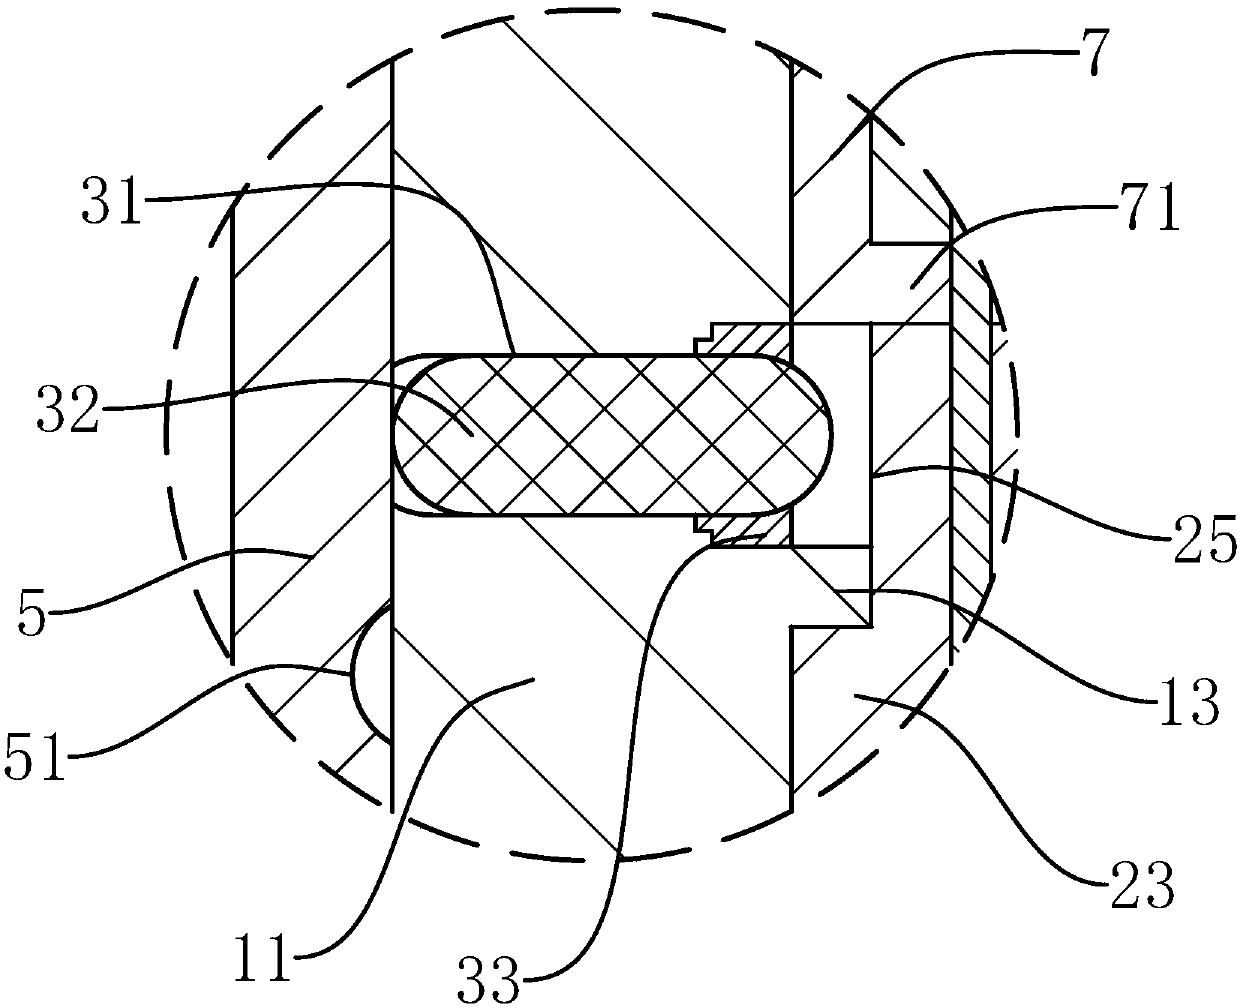 Liquid bag quick disassembling structure and assembling and disassembling methods